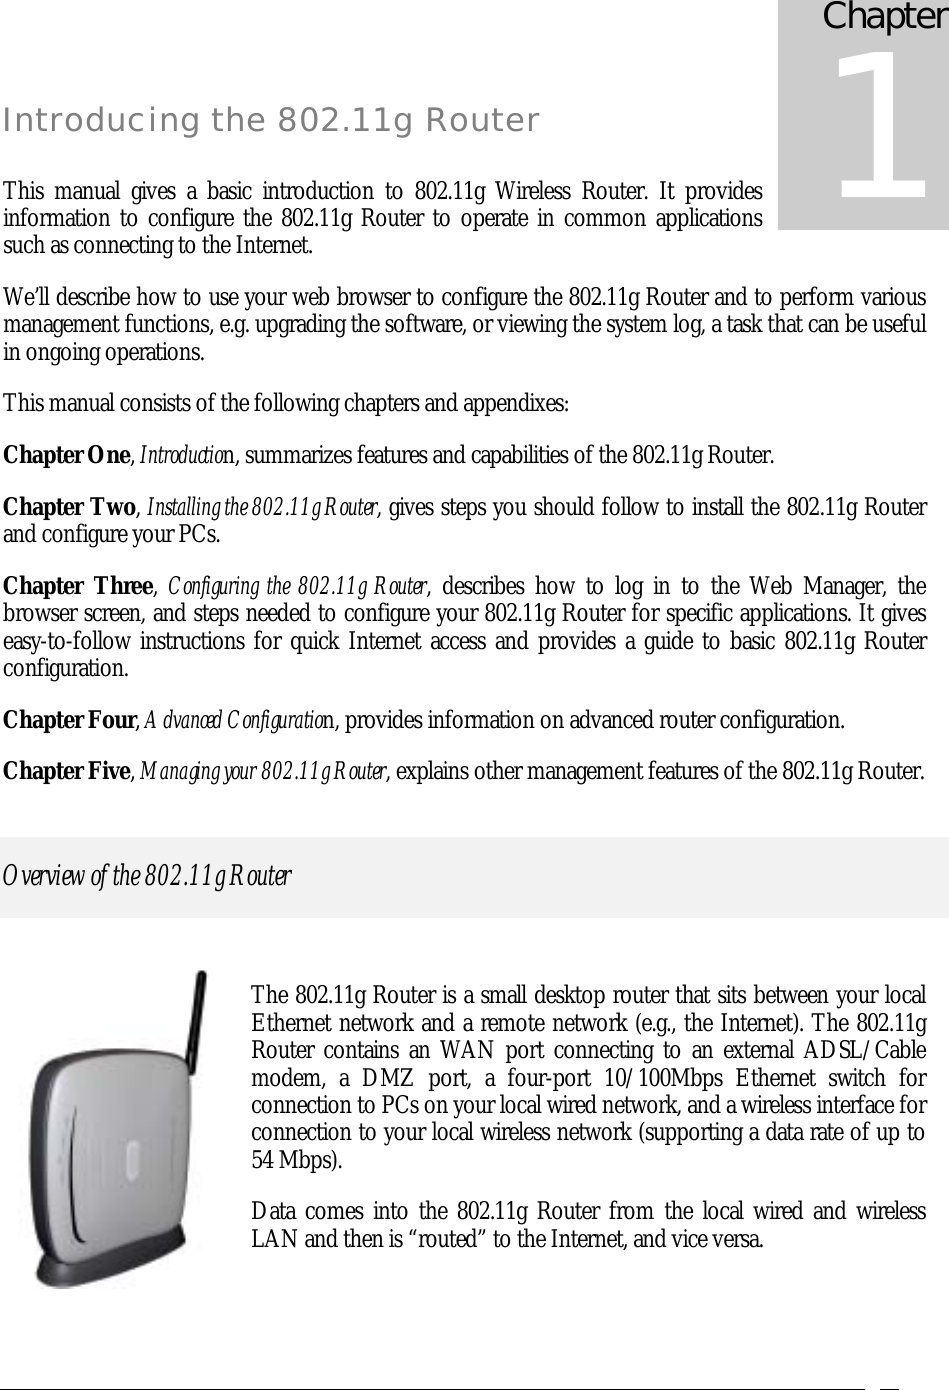    Introducing the 802.11g Router  This manual gives a basic introduction to 802.11g Wireless Router. It provides information to configure the 802.11g Router to operate in common applications such as connecting to the Internet. We’ll describe how to use your web browser to configure the 802.11g Router and to perform various management functions, e.g. upgrading the software, or viewing the system log, a task that can be useful in ongoing operations.  This manual consists of the following chapters and appendixes: Chapter One, Introduction, summarizes features and capabilities of the 802.11g Router. Chapter Two, Installing the 802.11g Router, gives steps you should follow to install the 802.11g Router and configure your PCs. Chapter Three,  Configuring the 802.11g Router, describes how to log in to the Web Manager, the browser screen, and steps needed to configure your 802.11g Router for specific applications. It gives easy-to-follow instructions for quick Internet access and provides a guide to basic 802.11g Router configuration. Chapter Four, Advanced Configuration, provides information on advanced router configuration. Chapter Five, Managing your 802.11g Router, explains other management features of the 802.11g Router. Overview of the 802.11g Router  The 802.11g Router is a small desktop router that sits between your local Ethernet network and a remote network (e.g., the Internet). The 802.11g Router contains an WAN port connecting to an external ADSL/Cable modem, a DMZ port, a four-port 10/100Mbps Ethernet switch for connection to PCs on your local wired network, and a wireless interface for connection to your local wireless network (supporting a data rate of up to 54 Mbps). Data comes into the 802.11g Router from the local wired and wireless LAN and then is “routed” to the Internet, and vice versa.  Chapter 1 